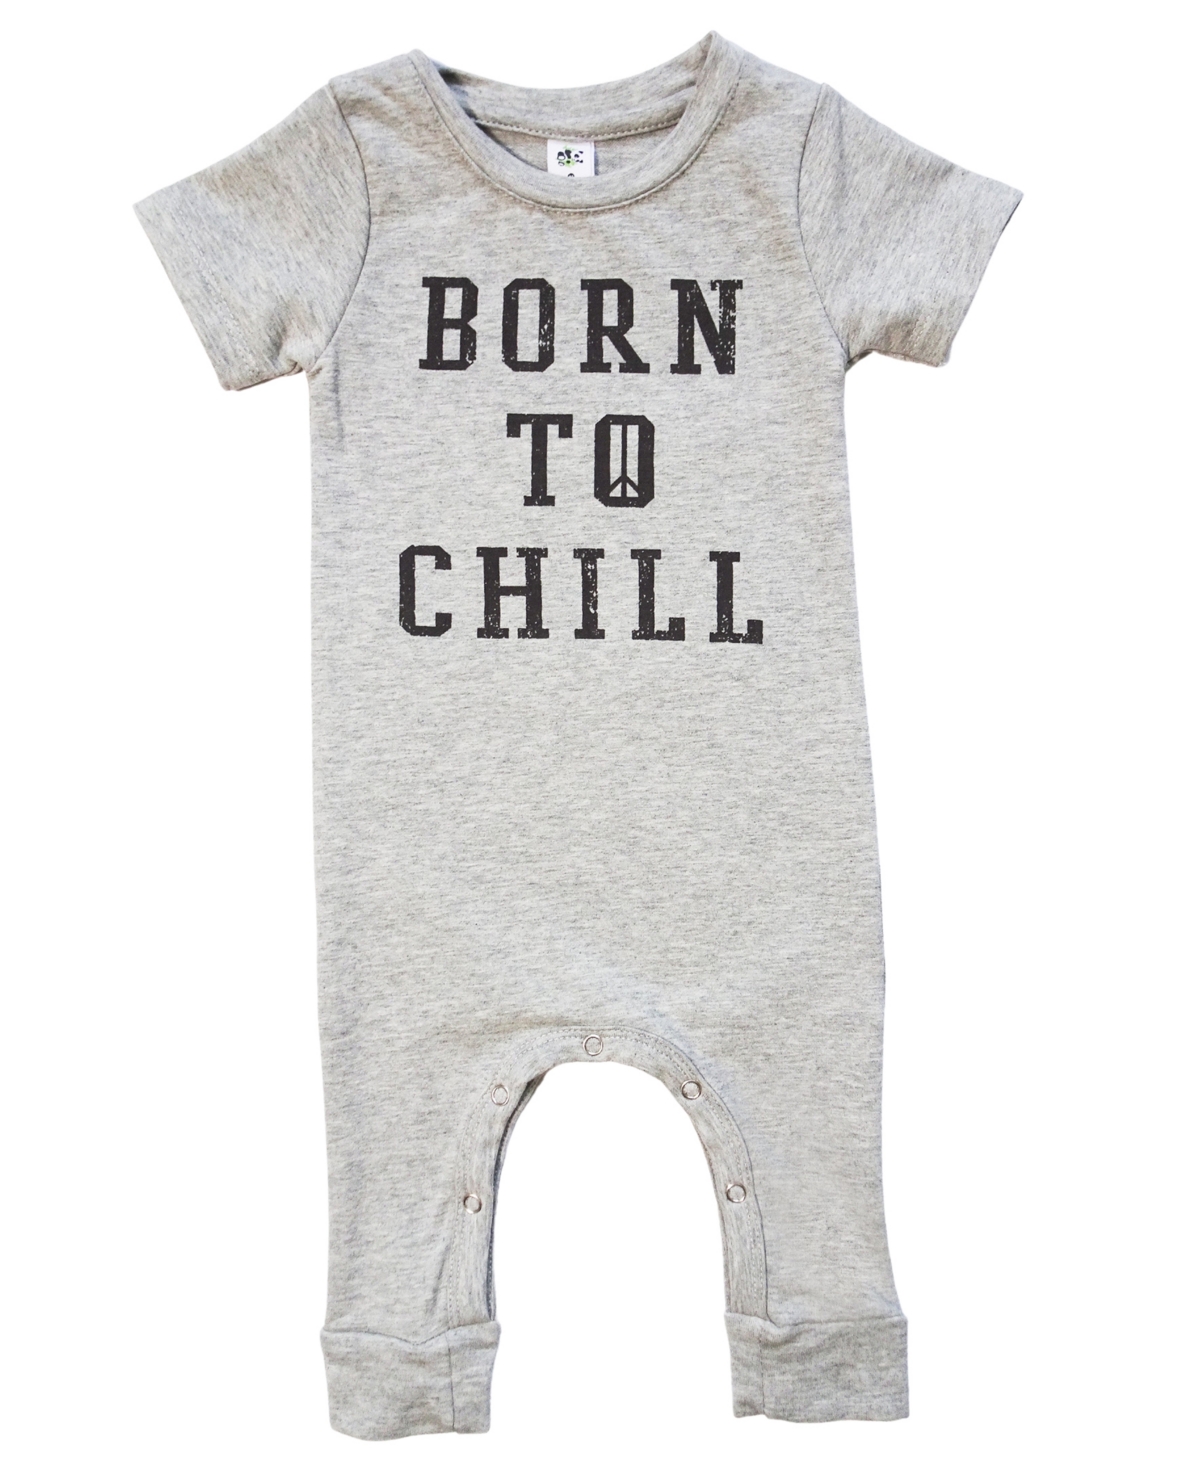 Earth Baby Outfitters Baby Boys Or Baby Girls Short Sleeve Romper In Gray,chill